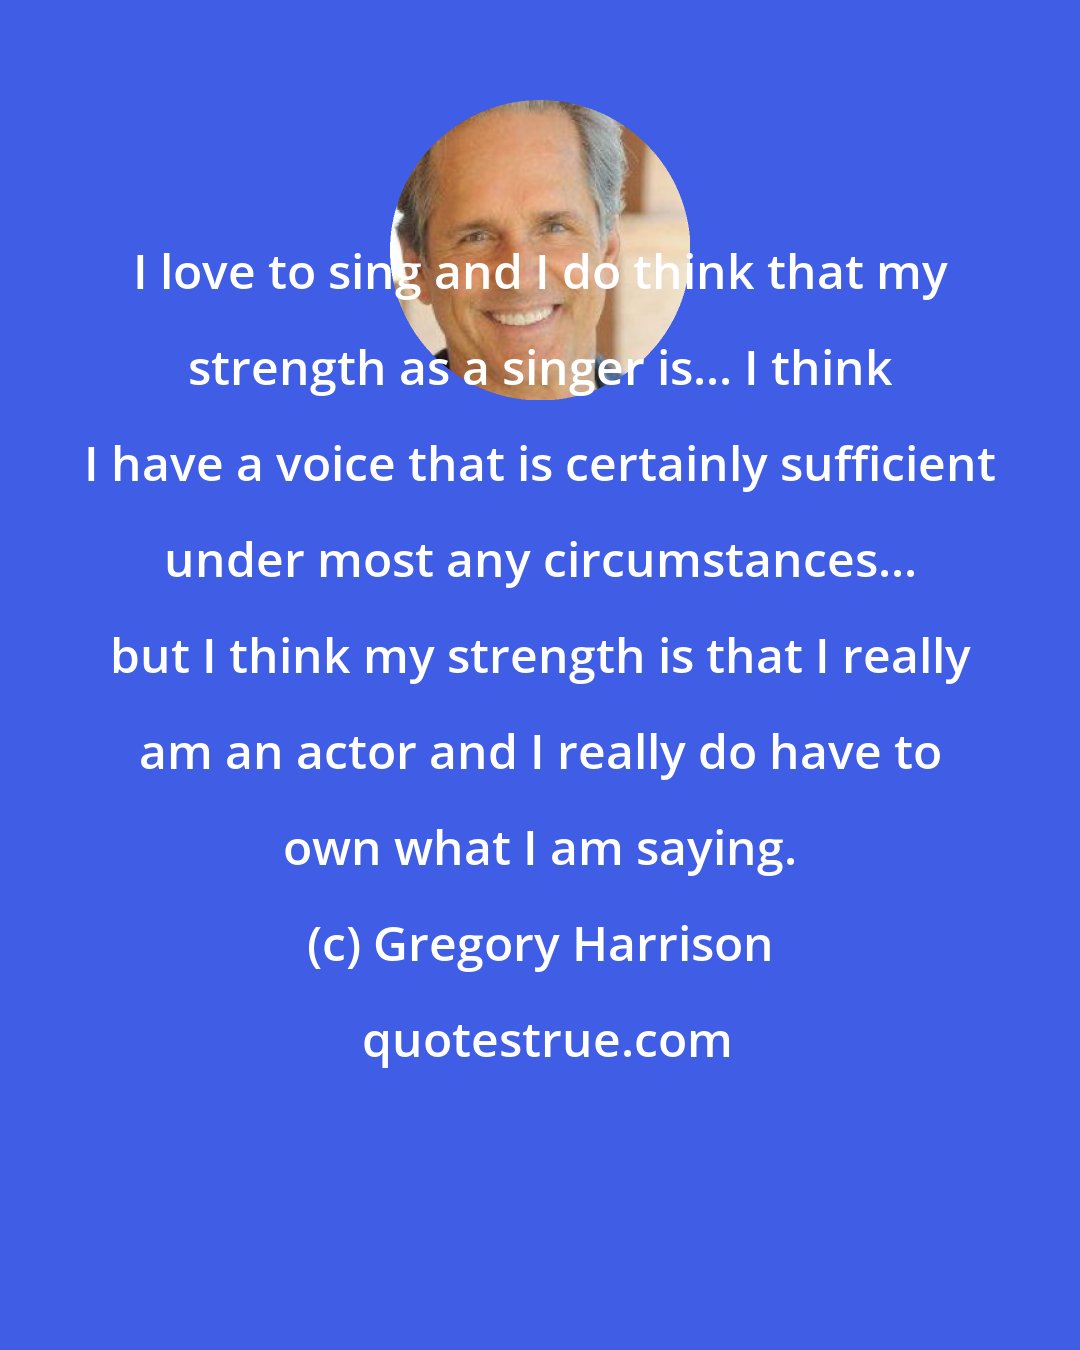 Gregory Harrison: I love to sing and I do think that my strength as a singer is... I think I have a voice that is certainly sufficient under most any circumstances... but I think my strength is that I really am an actor and I really do have to own what I am saying.